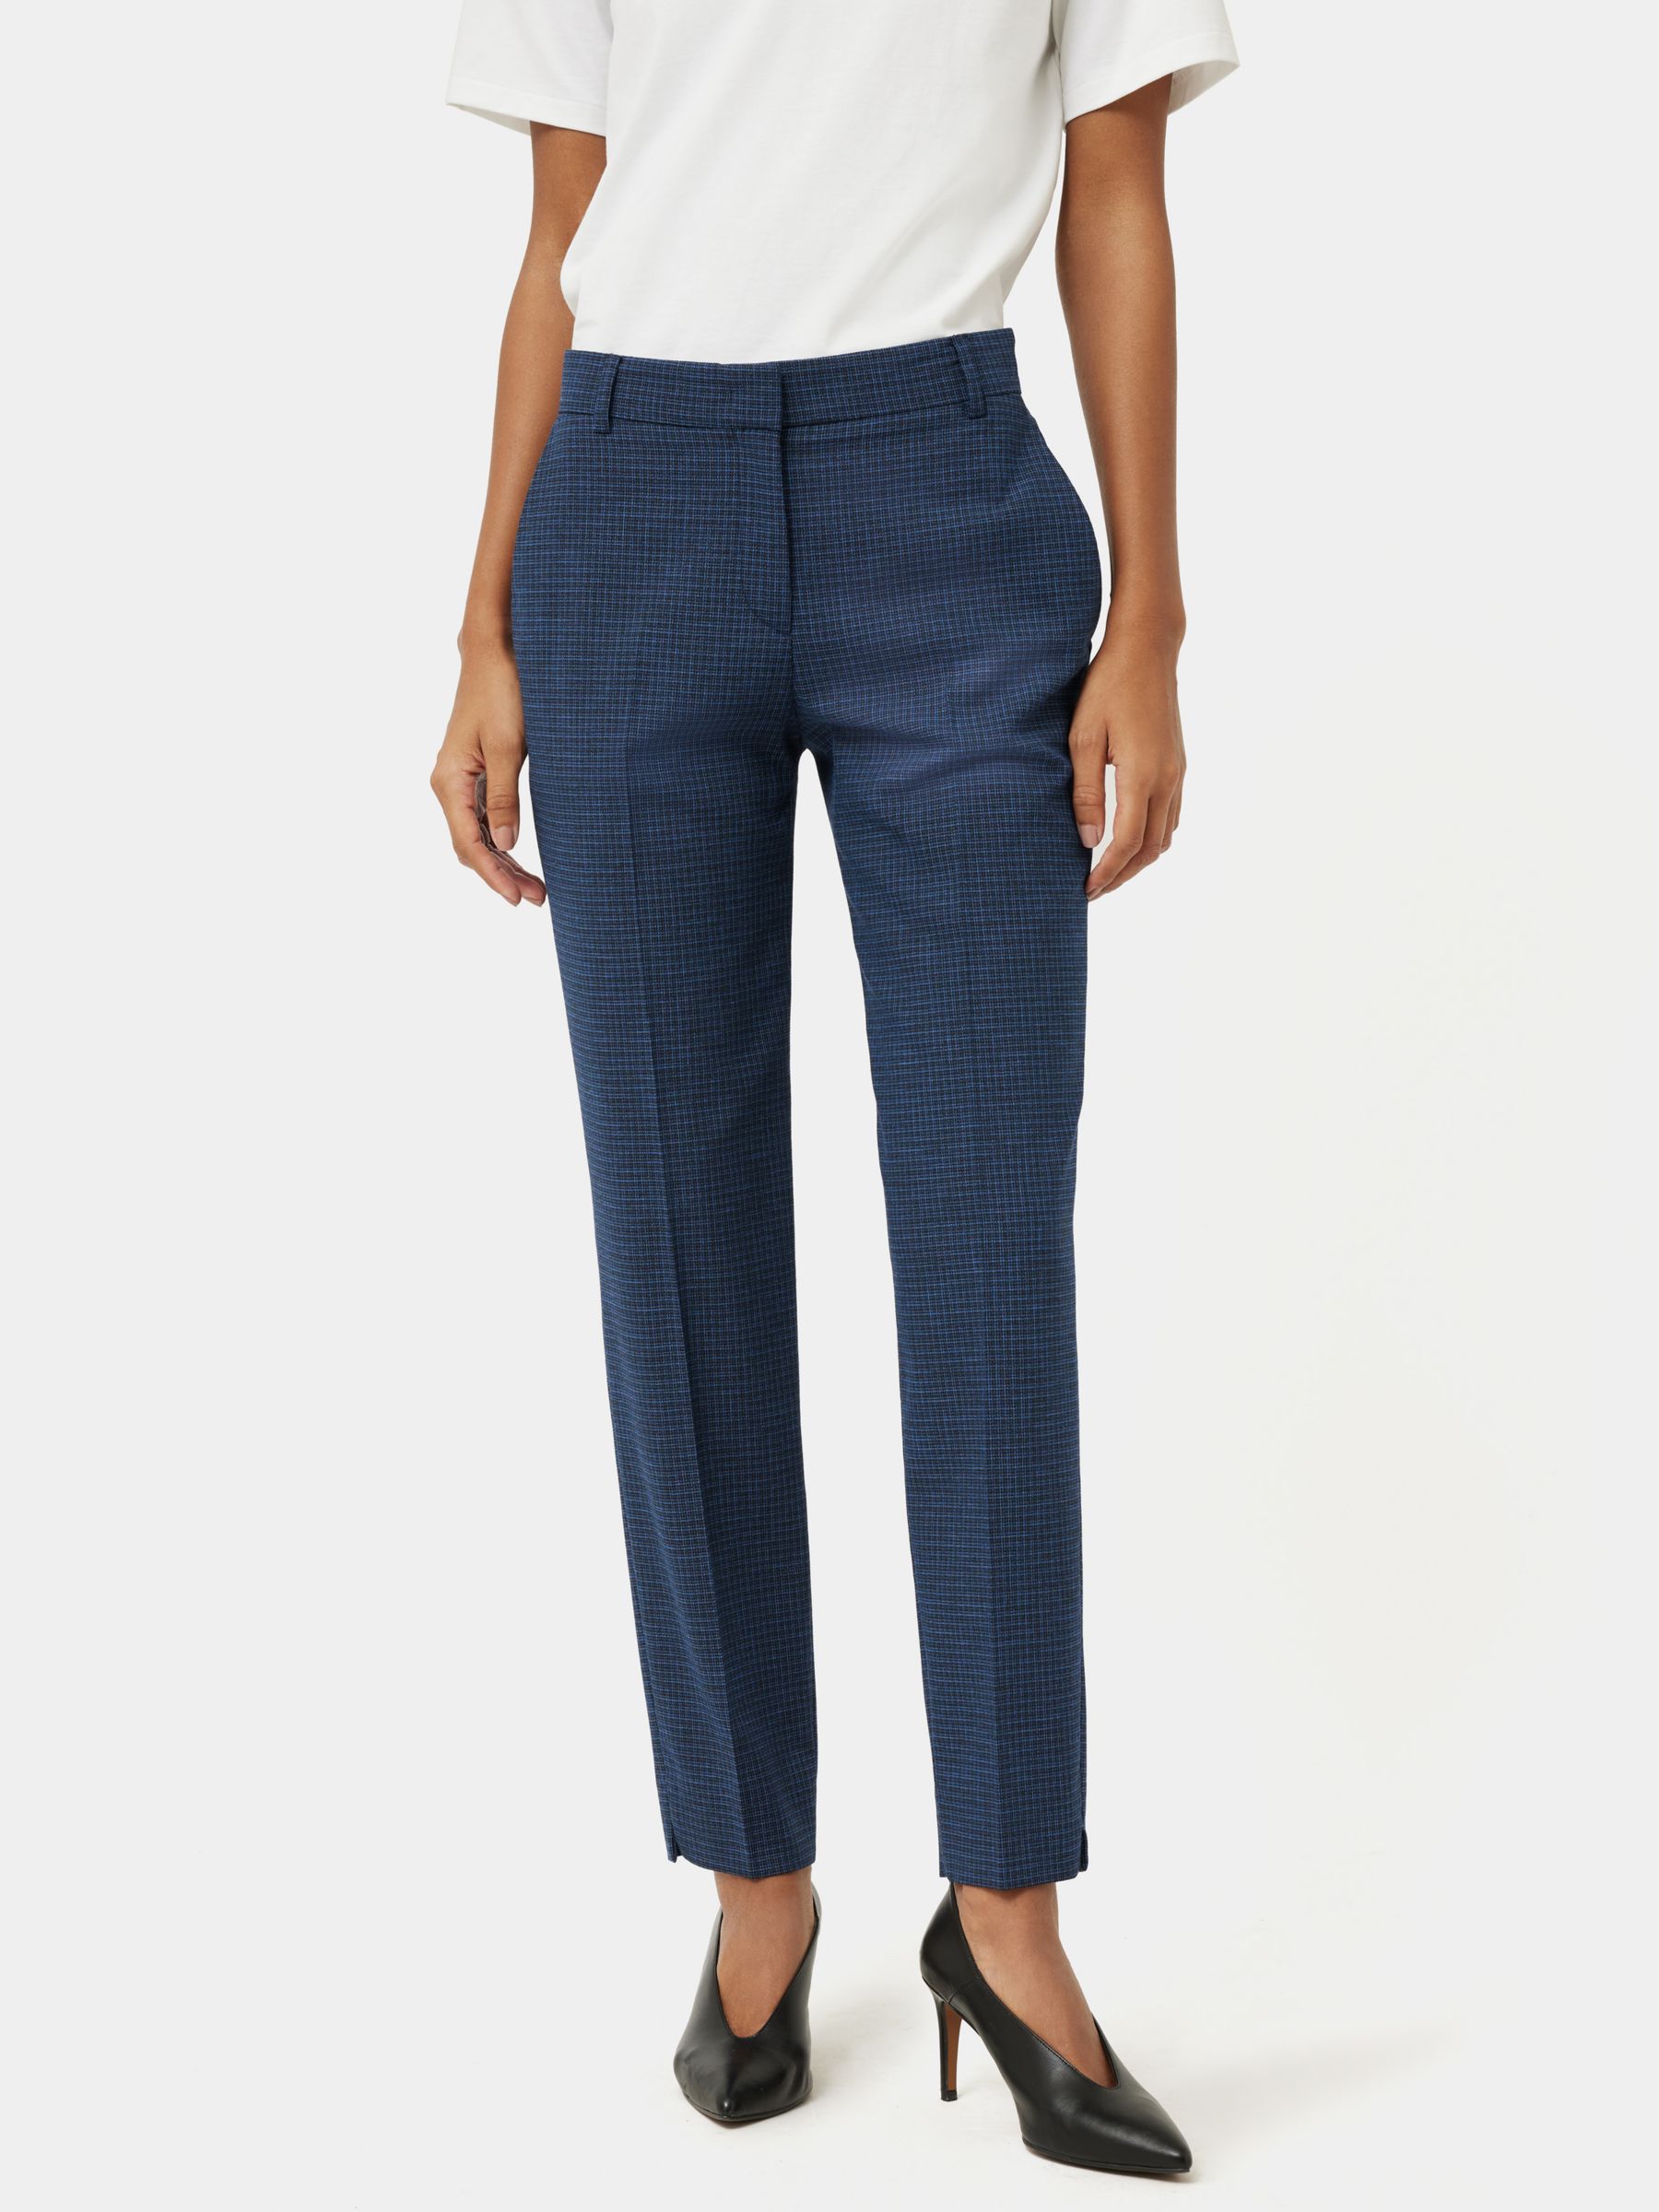 Jigsaw Palmer Gingham Check Trousers, Navy at John Lewis & Partners